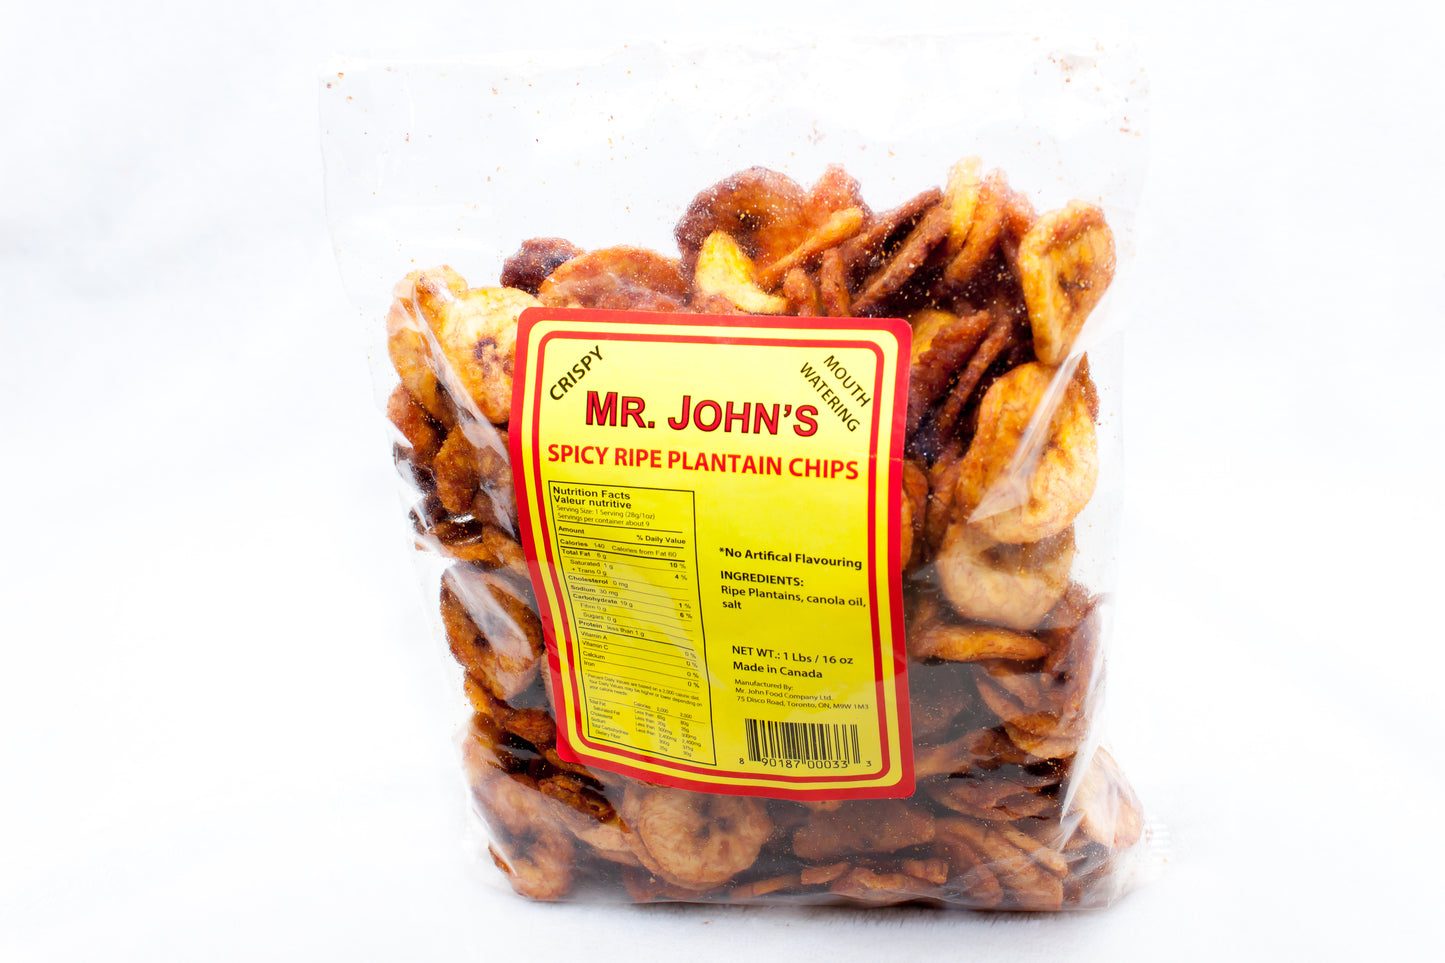 Big Spicy Plaintain Chips